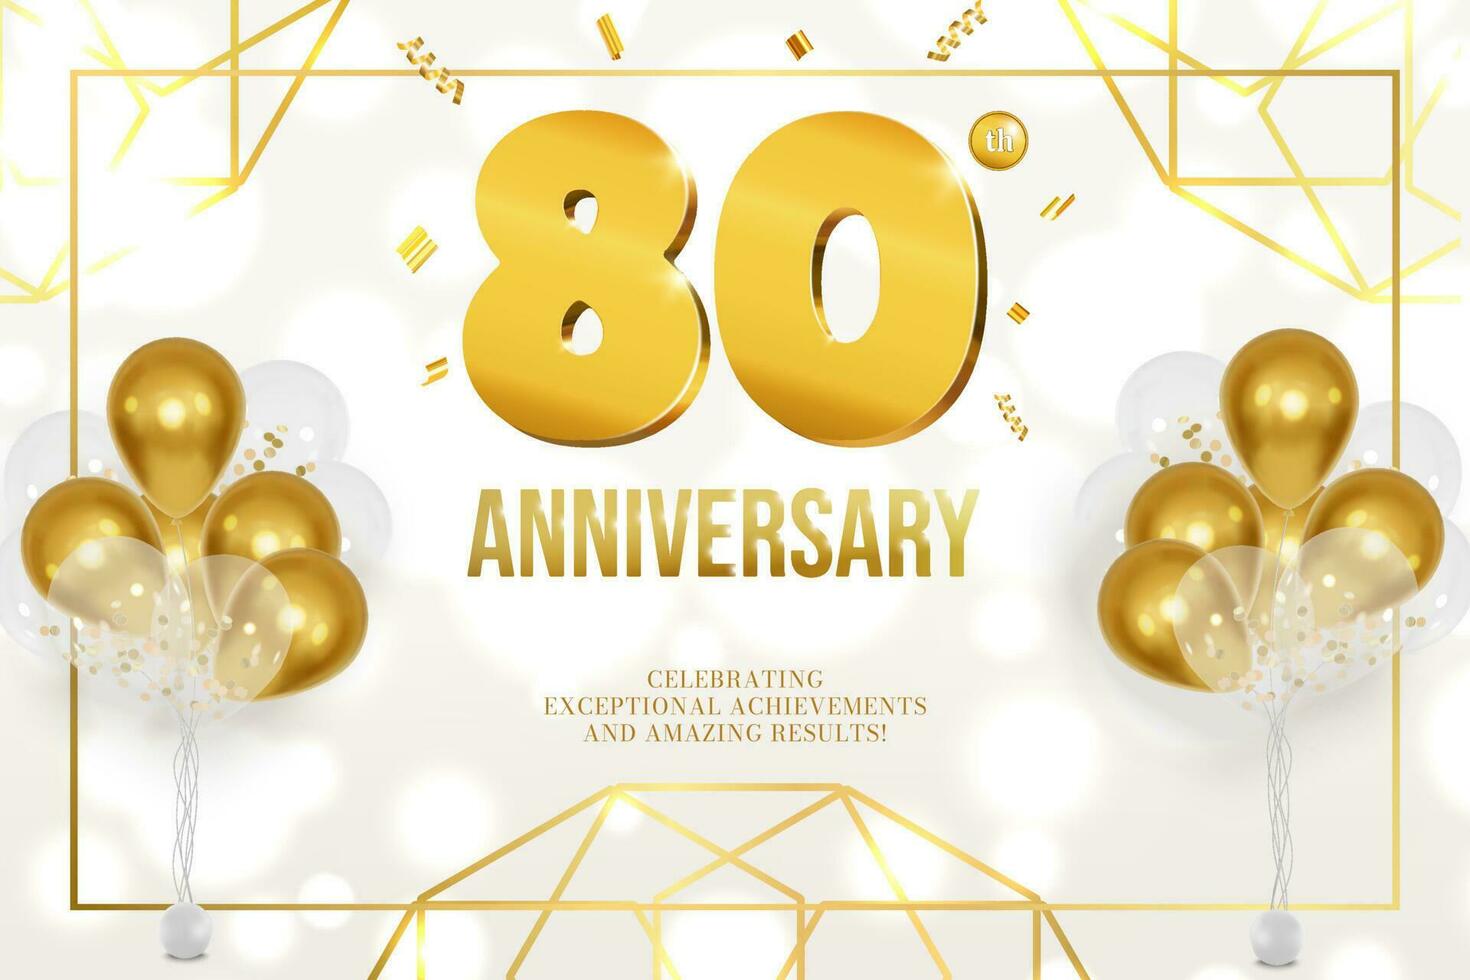 Anniversary celebration horizontal flyer golden letters and balloons 80 vector